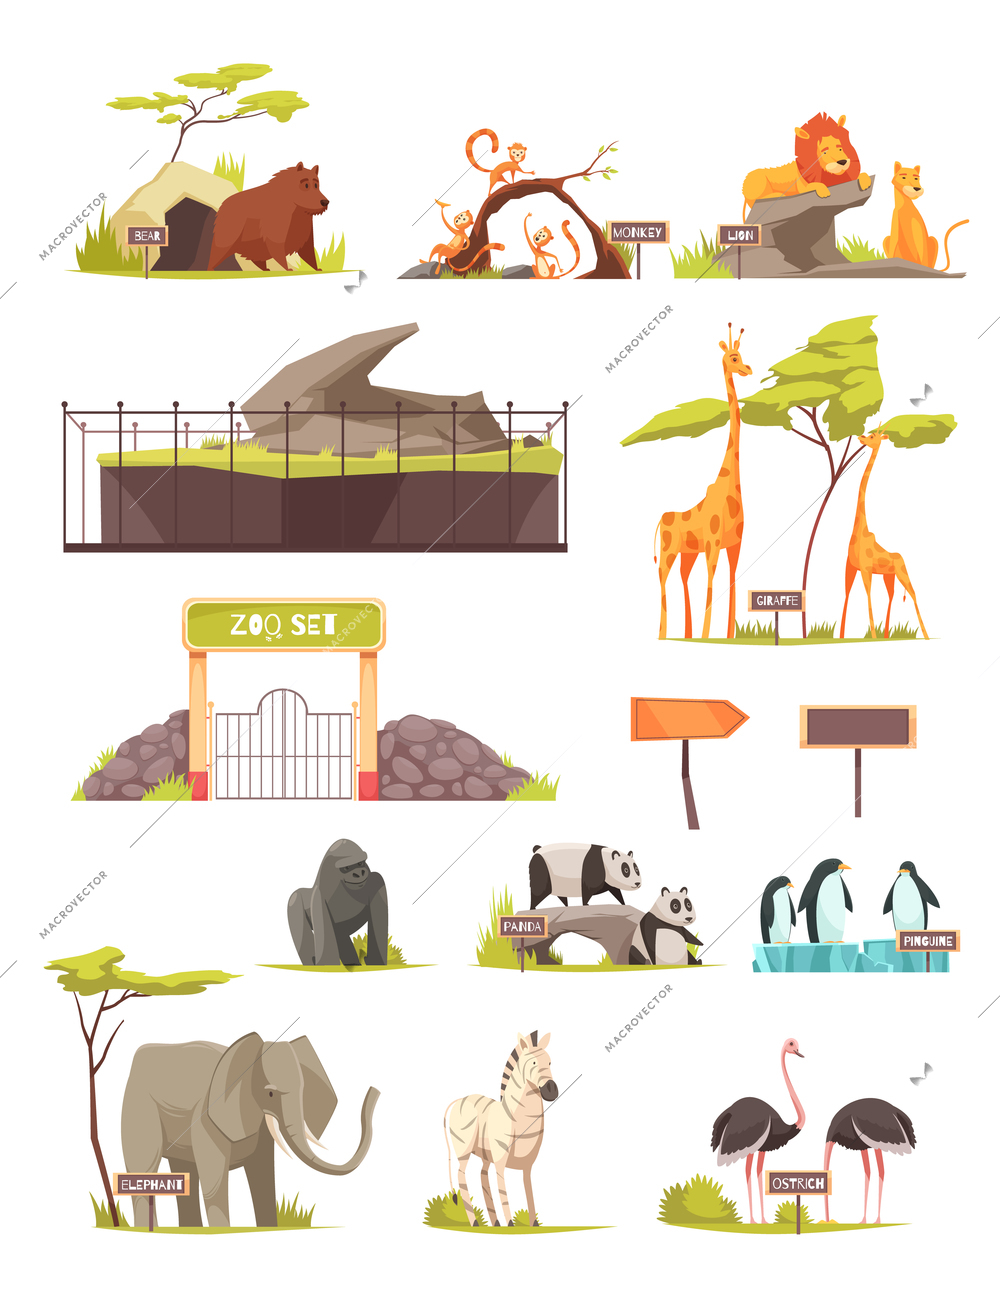 Zoo animals cartoon icons collection with zebra elephant bird ostrich lions giraffe panda penguins isolated vector illustration